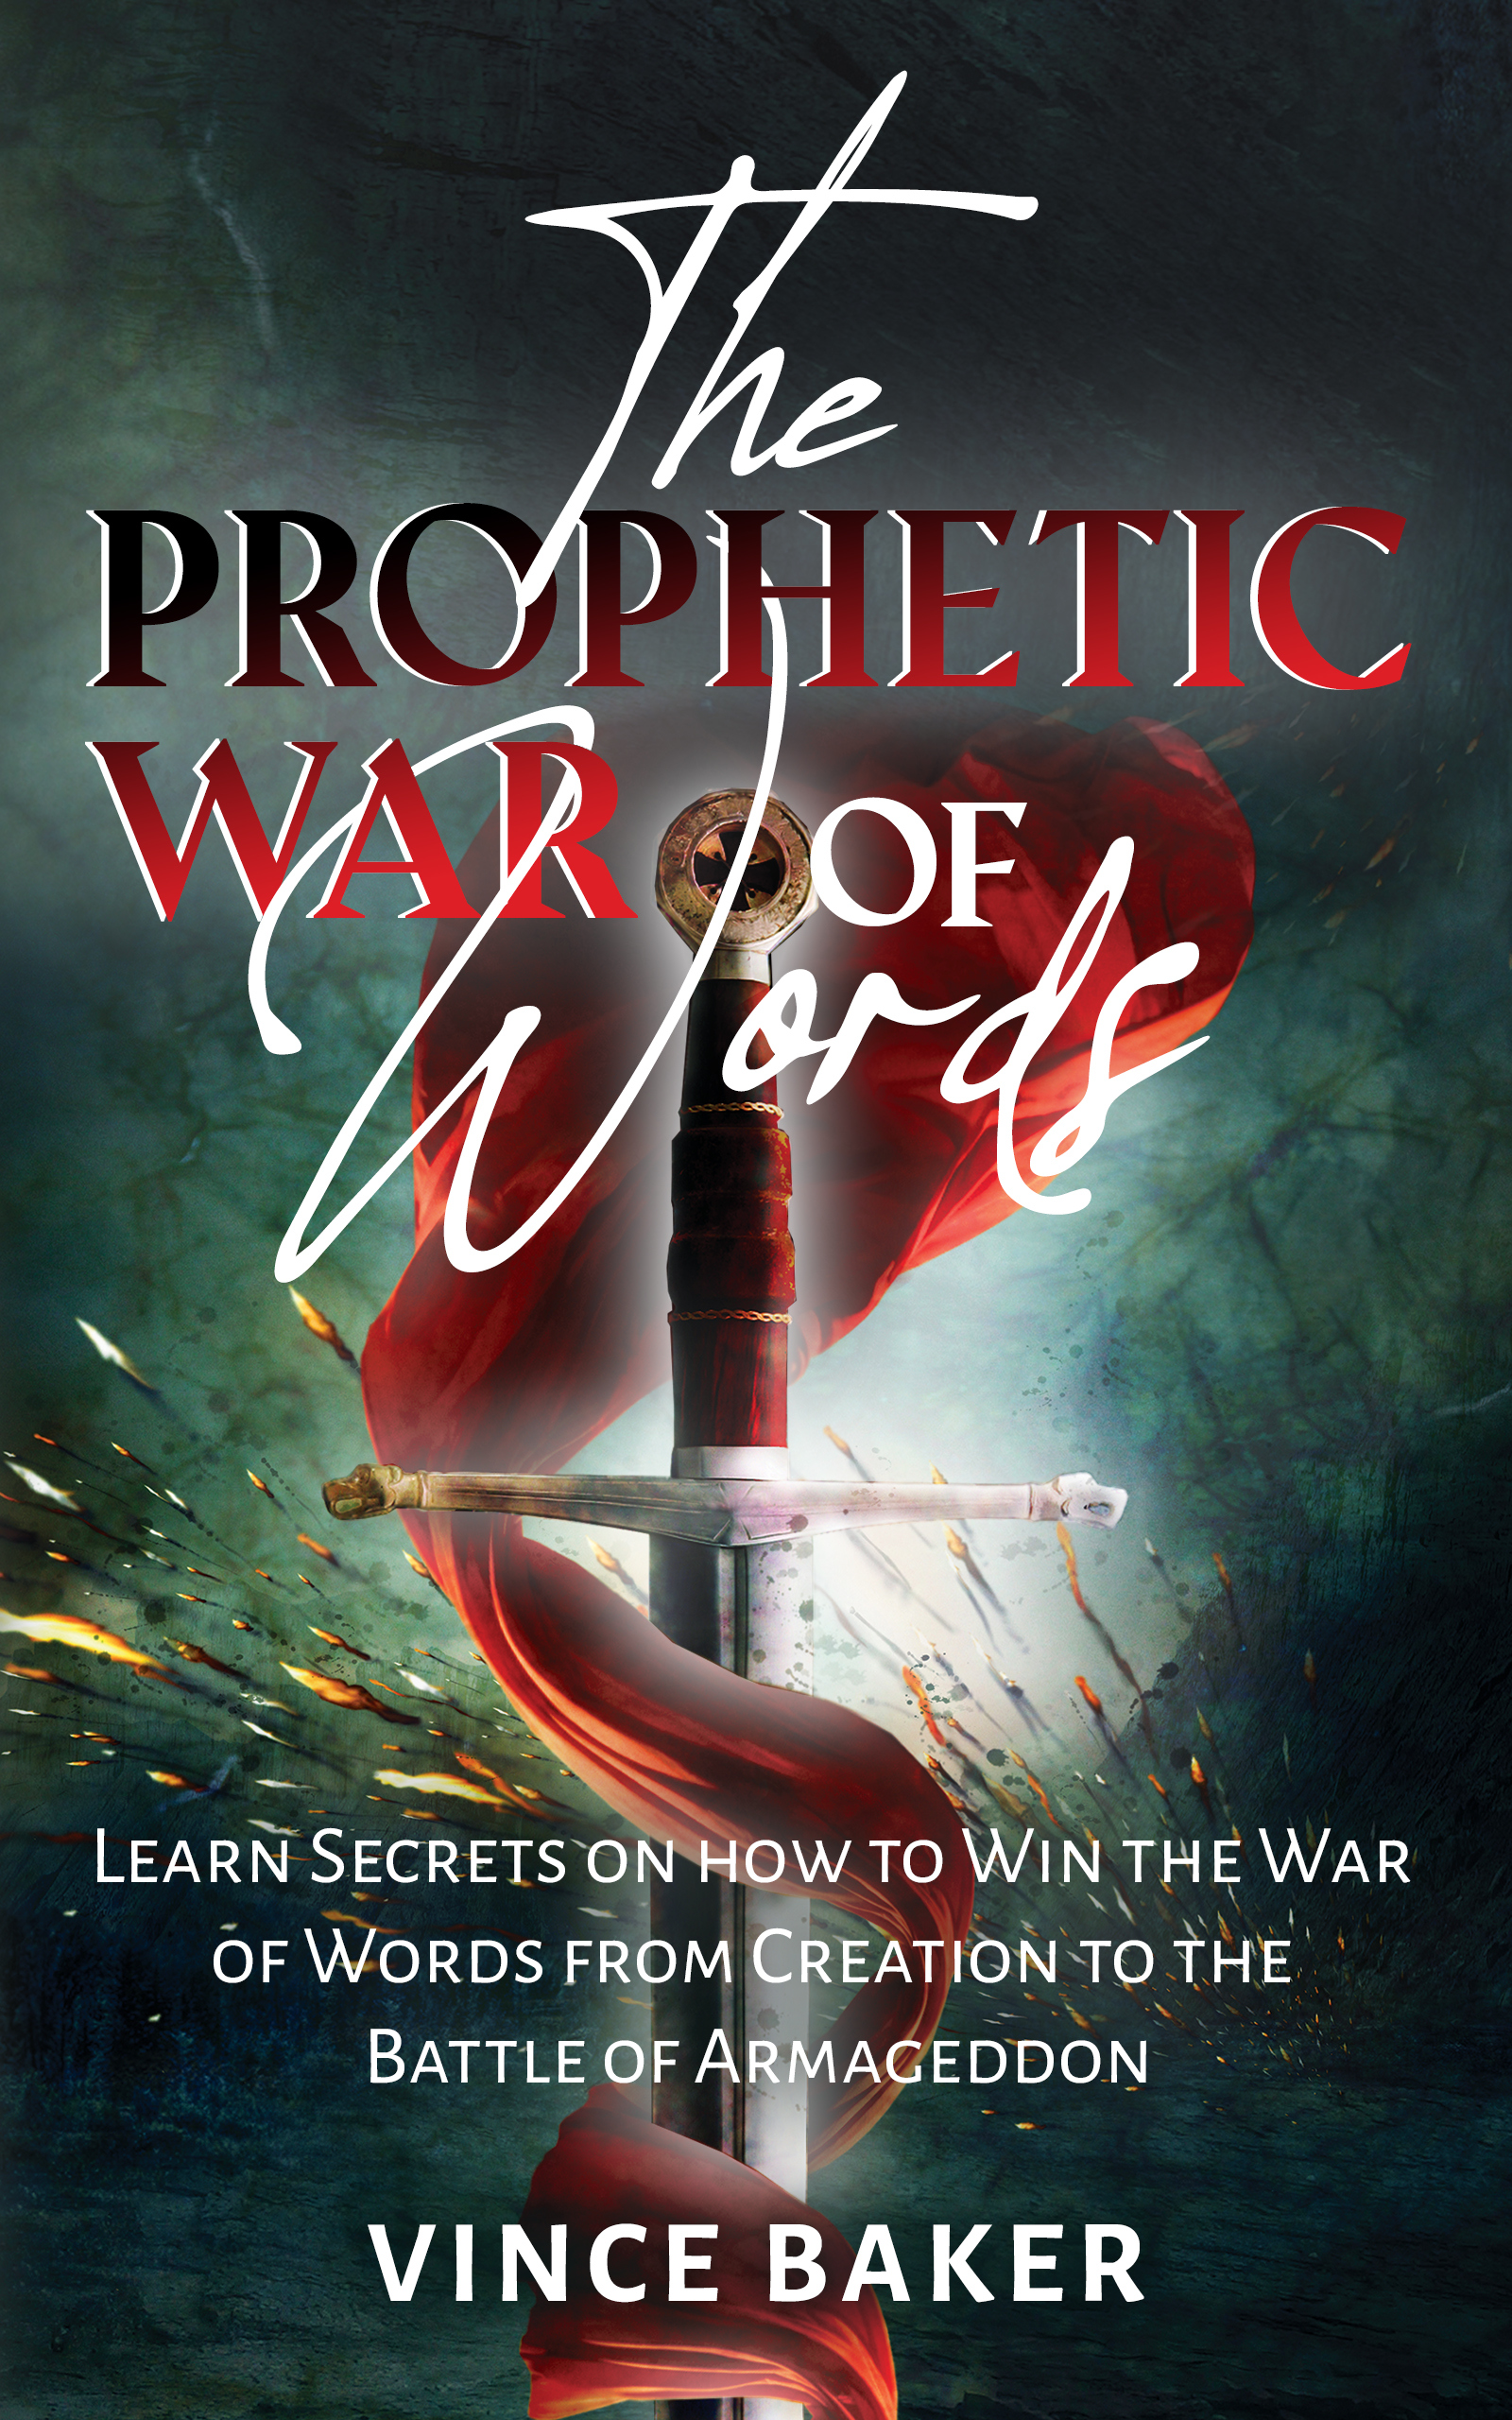 Vince Baker Ministries launch their new book, “The Prophetic War of Words” 16